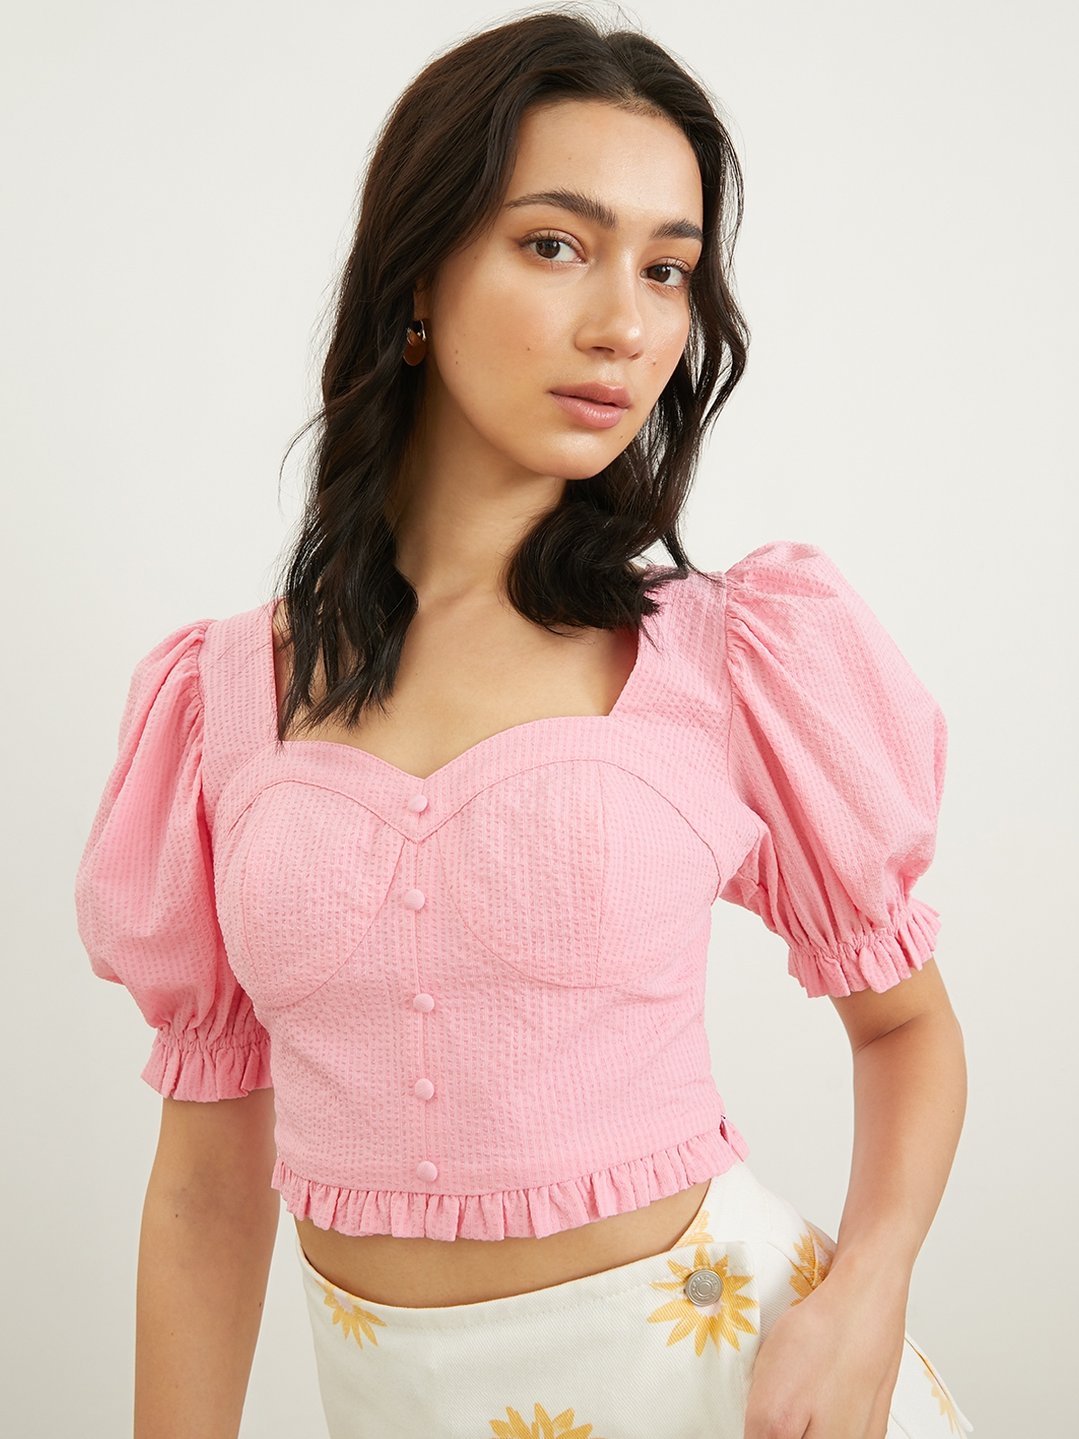 Puffed Sleeve Fit Blouse - Hot Pink - Pomelo Fashion